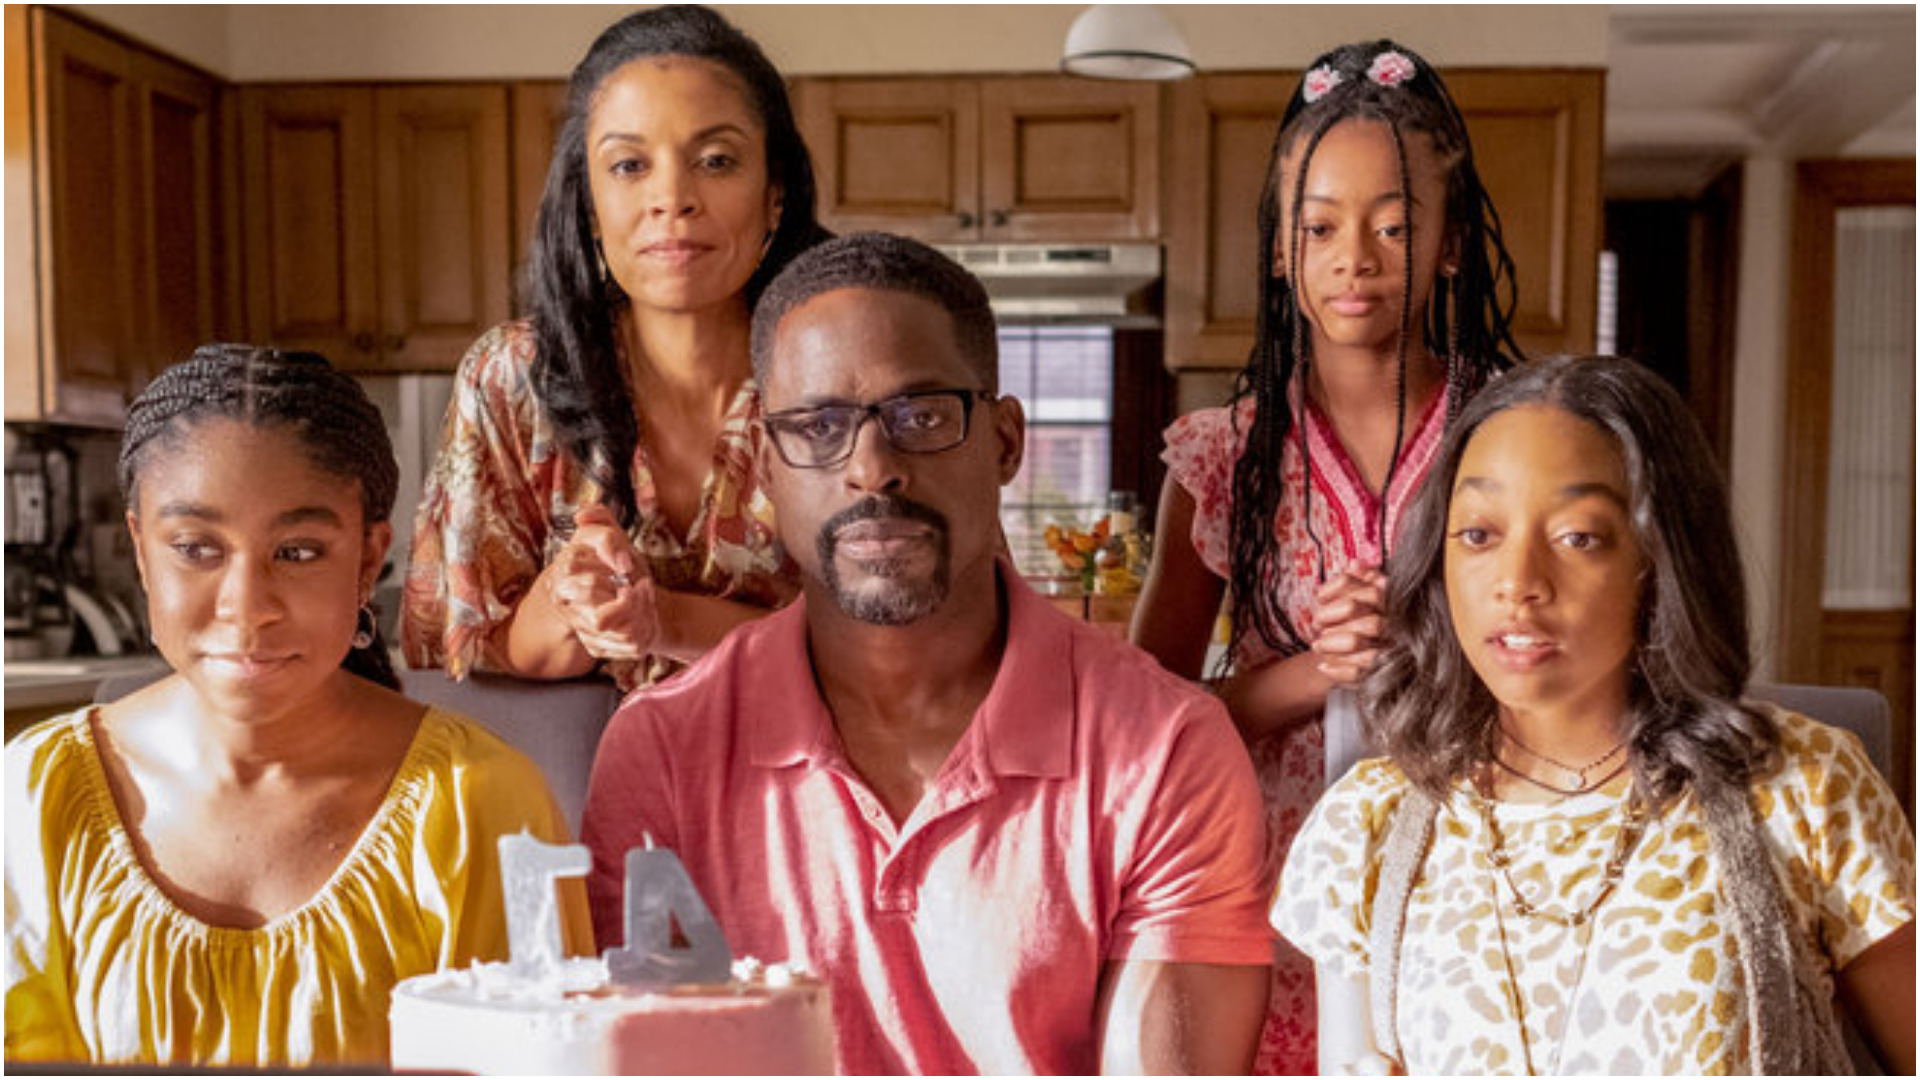 Lyric Ross as Deja, Susan Kelechi Watson as Beth, Sterling K. Brown as Randall, Eris Baker as Tess, Faithe Herman as Annie sit together on the Big Three’s birthday in the ‘This Is Us’ Season 6 premiere